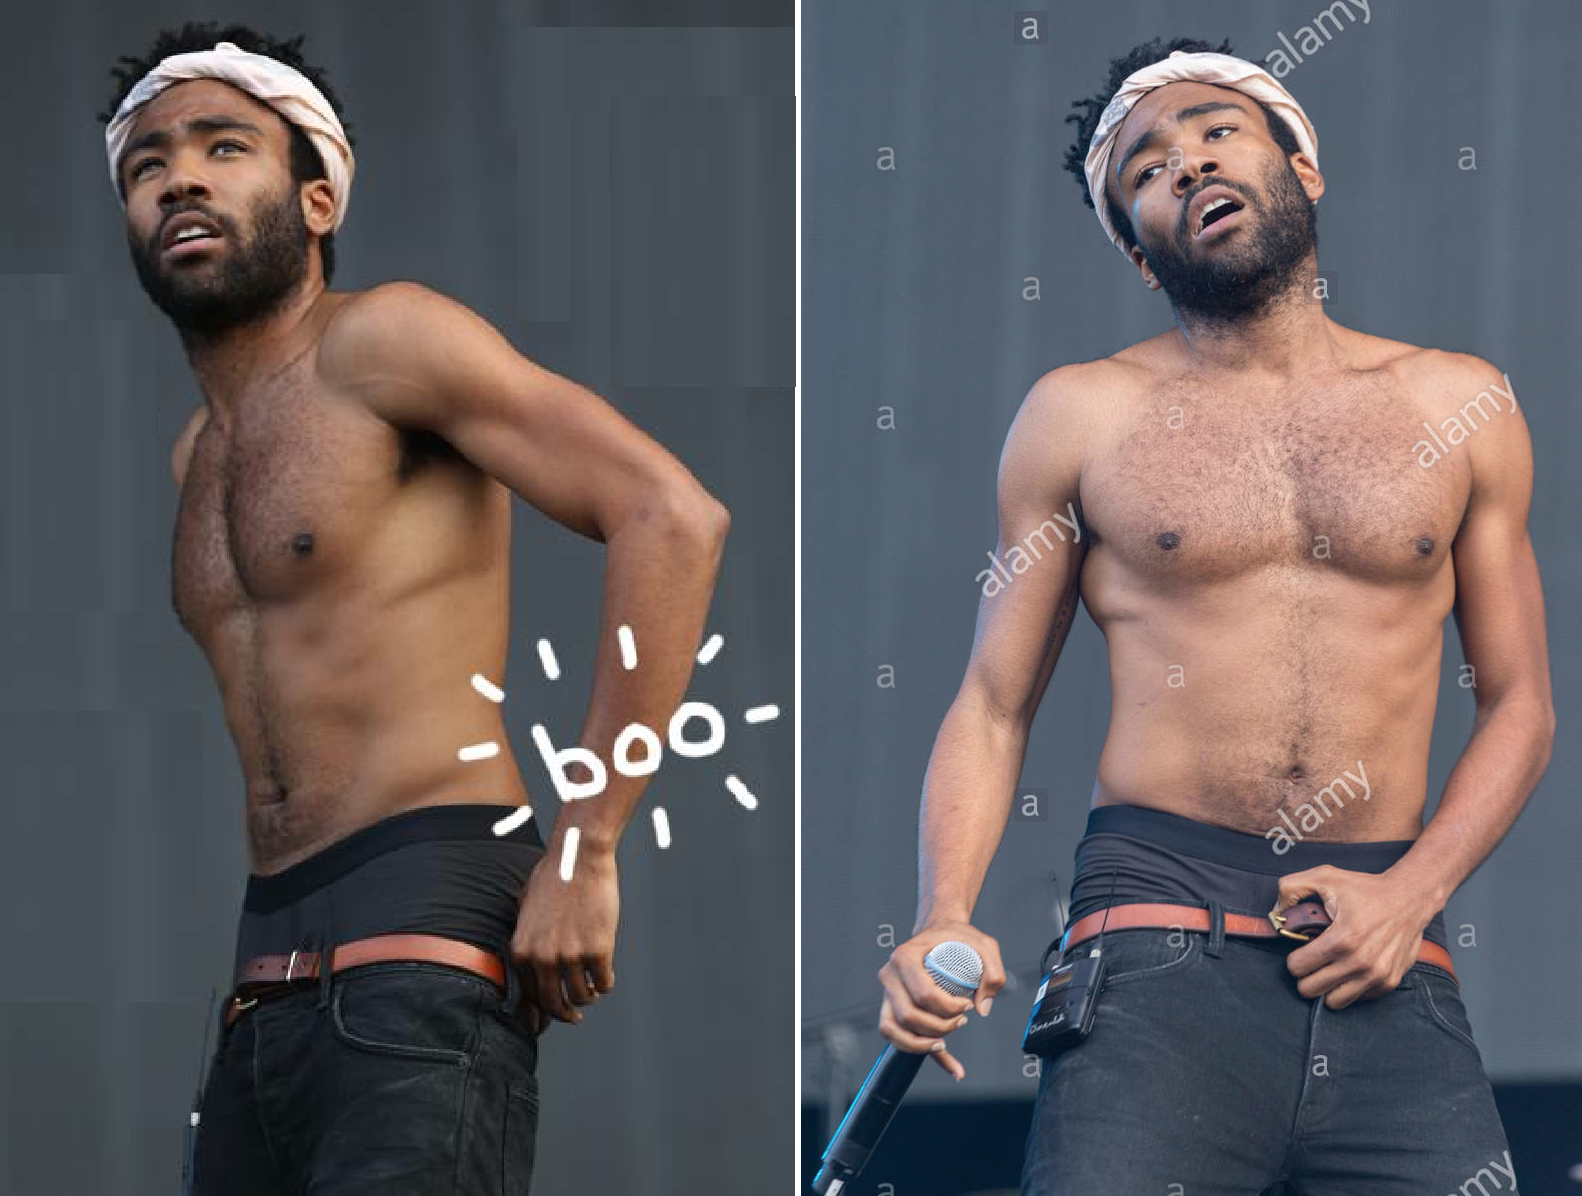 my new plaid pants: Good Morning, Gratuitous Donald Glover sorted by. relev...